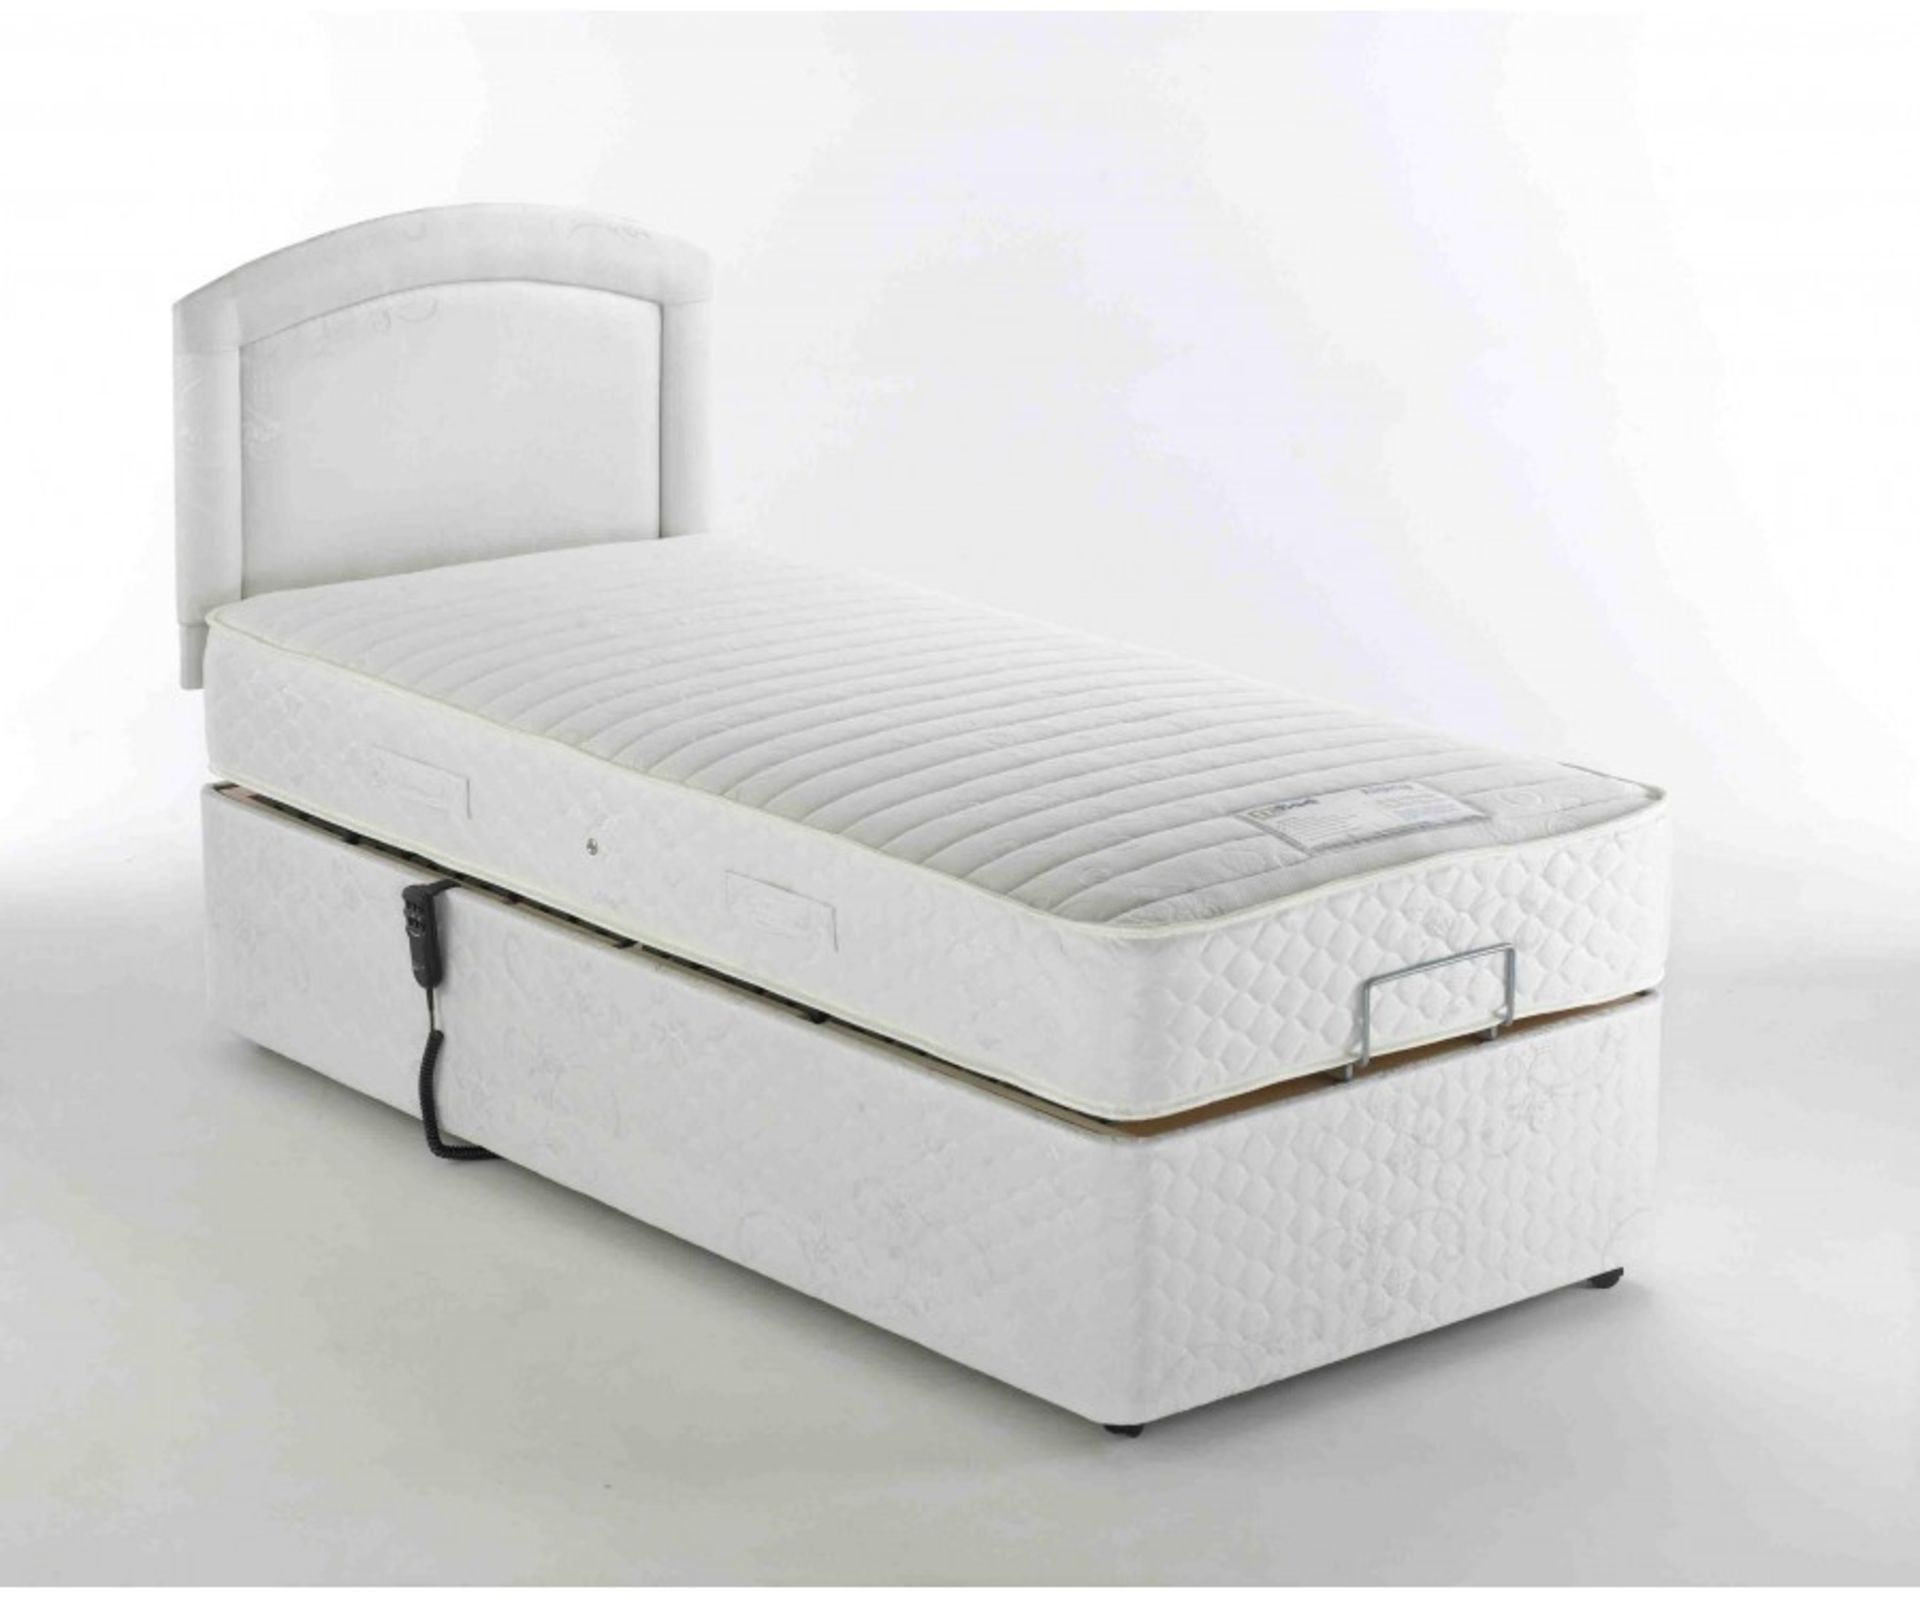 Brand New 2'6 Small Single Alpina Pocket Electric Adjustable Bed